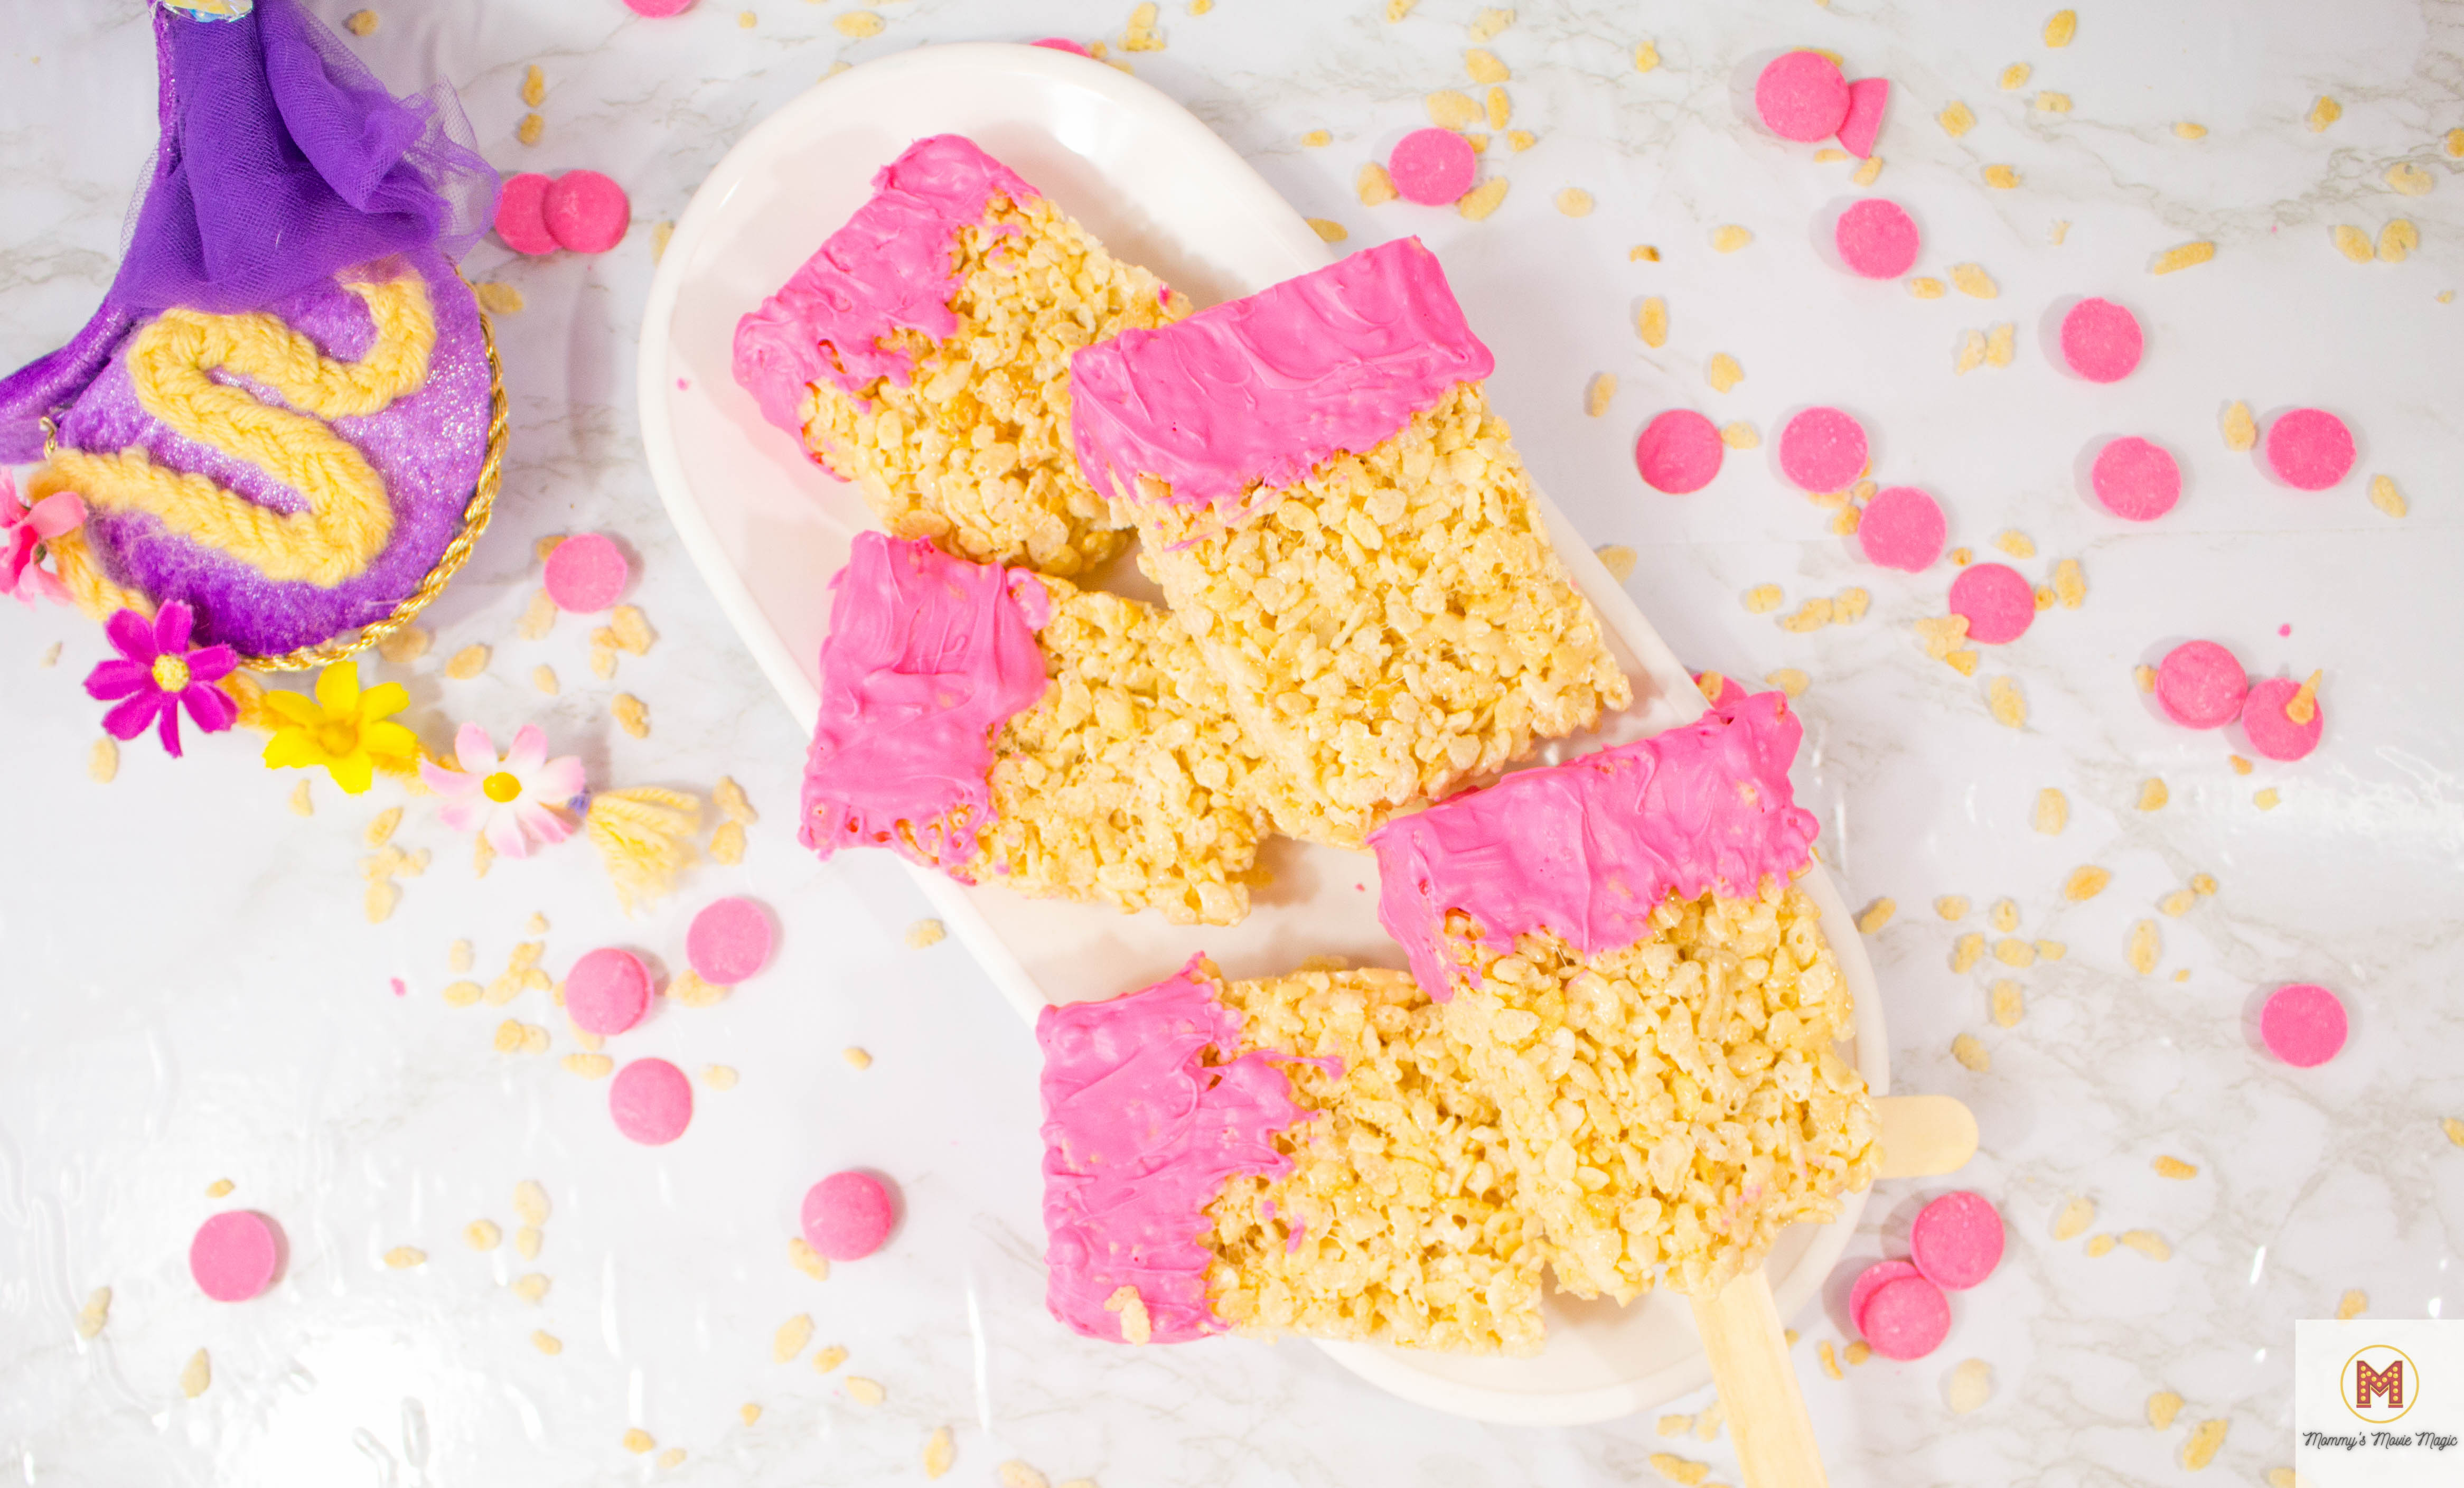 Rapunzel Movie Night for Family Movie night idea with Rapunzel Party food - Rice Krispie Paint Brushes Recipe